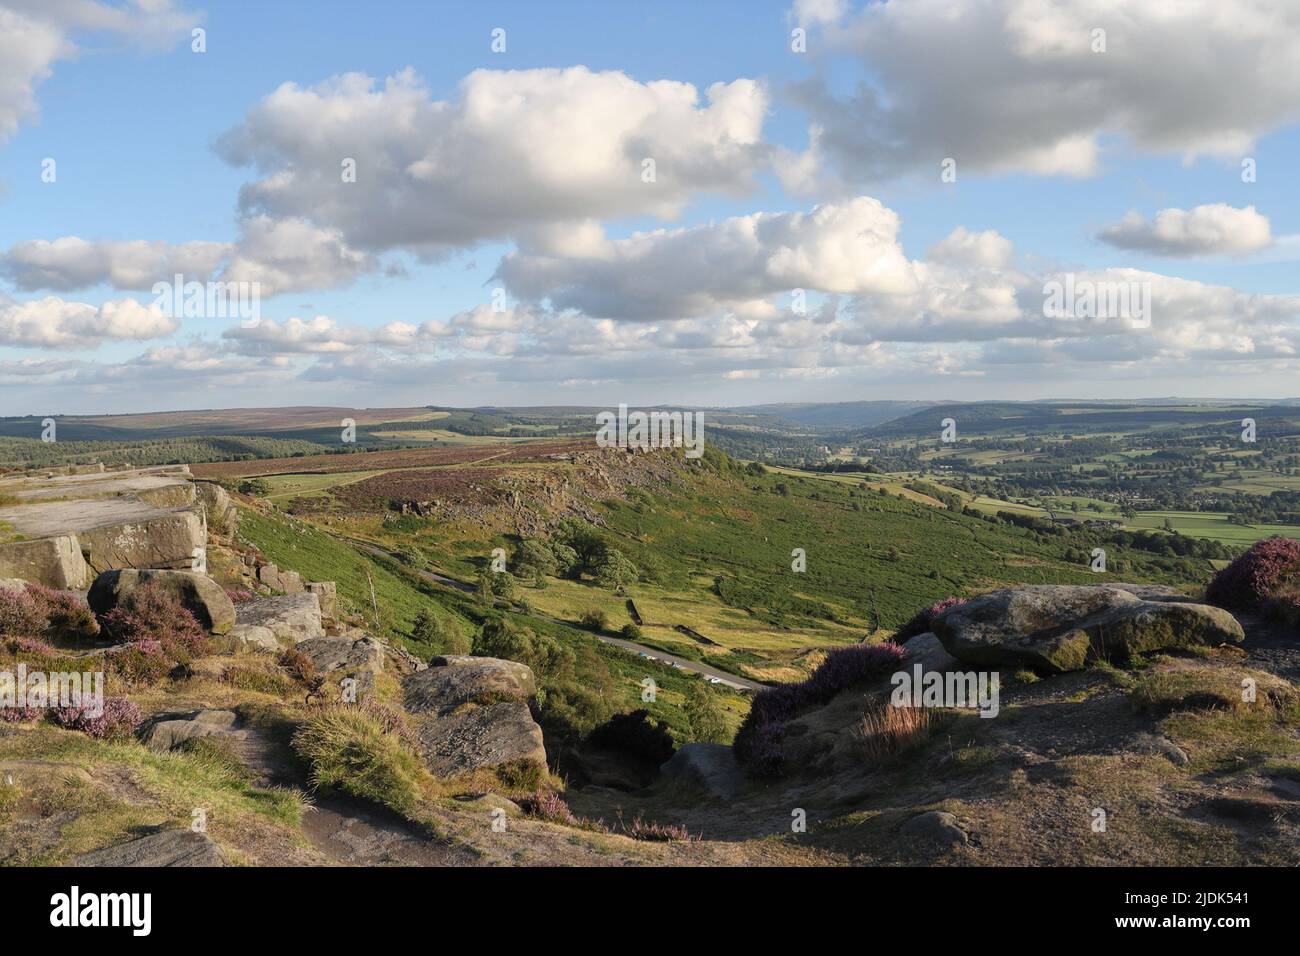 Curbar edge looking over Baslow Edge in the Peak District, Derbyshire landscape England. British countryside National park Stock Photo